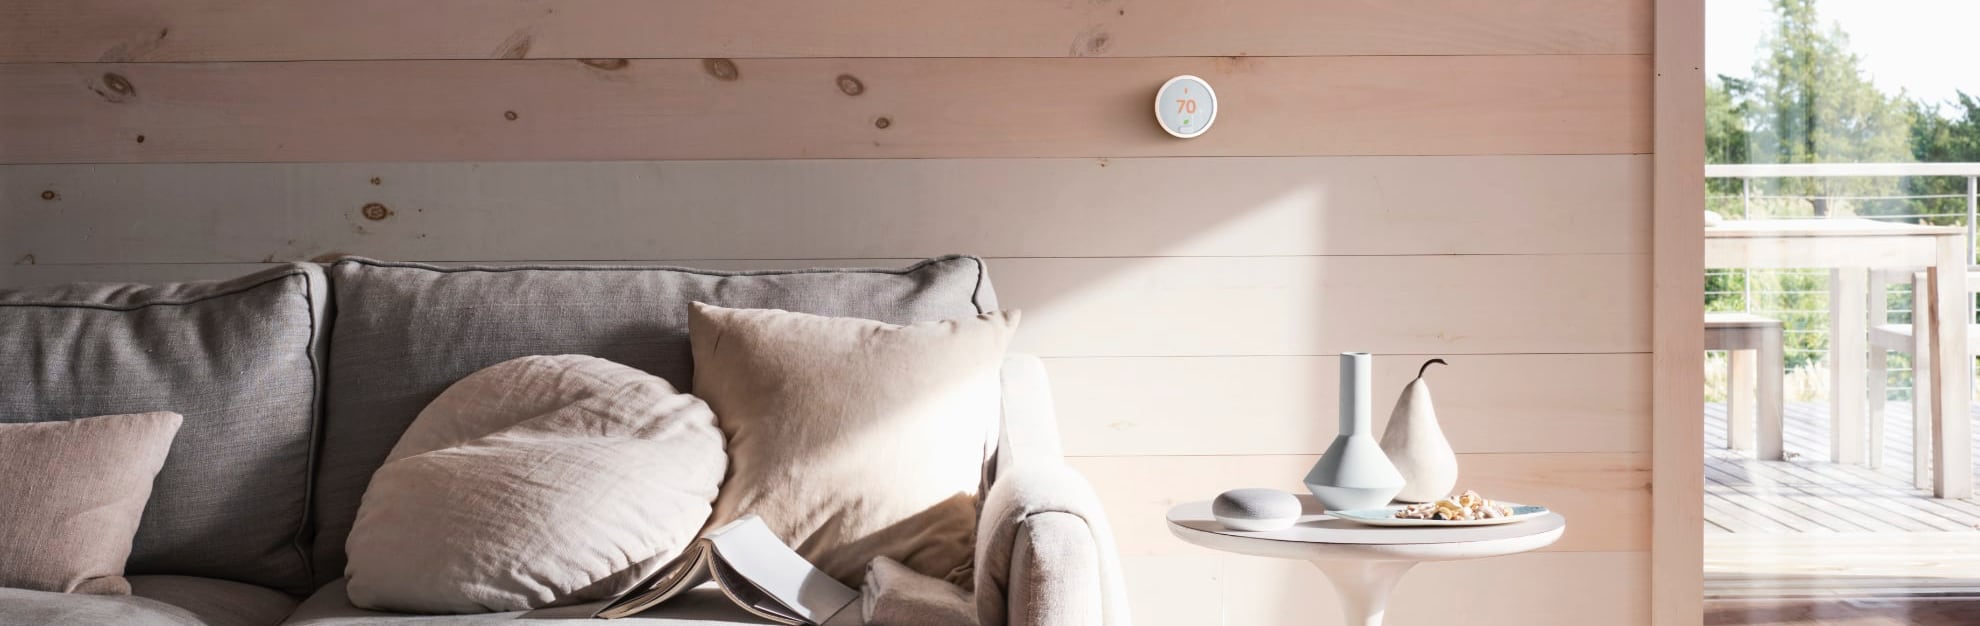 Vivint Home Automation in Naperville